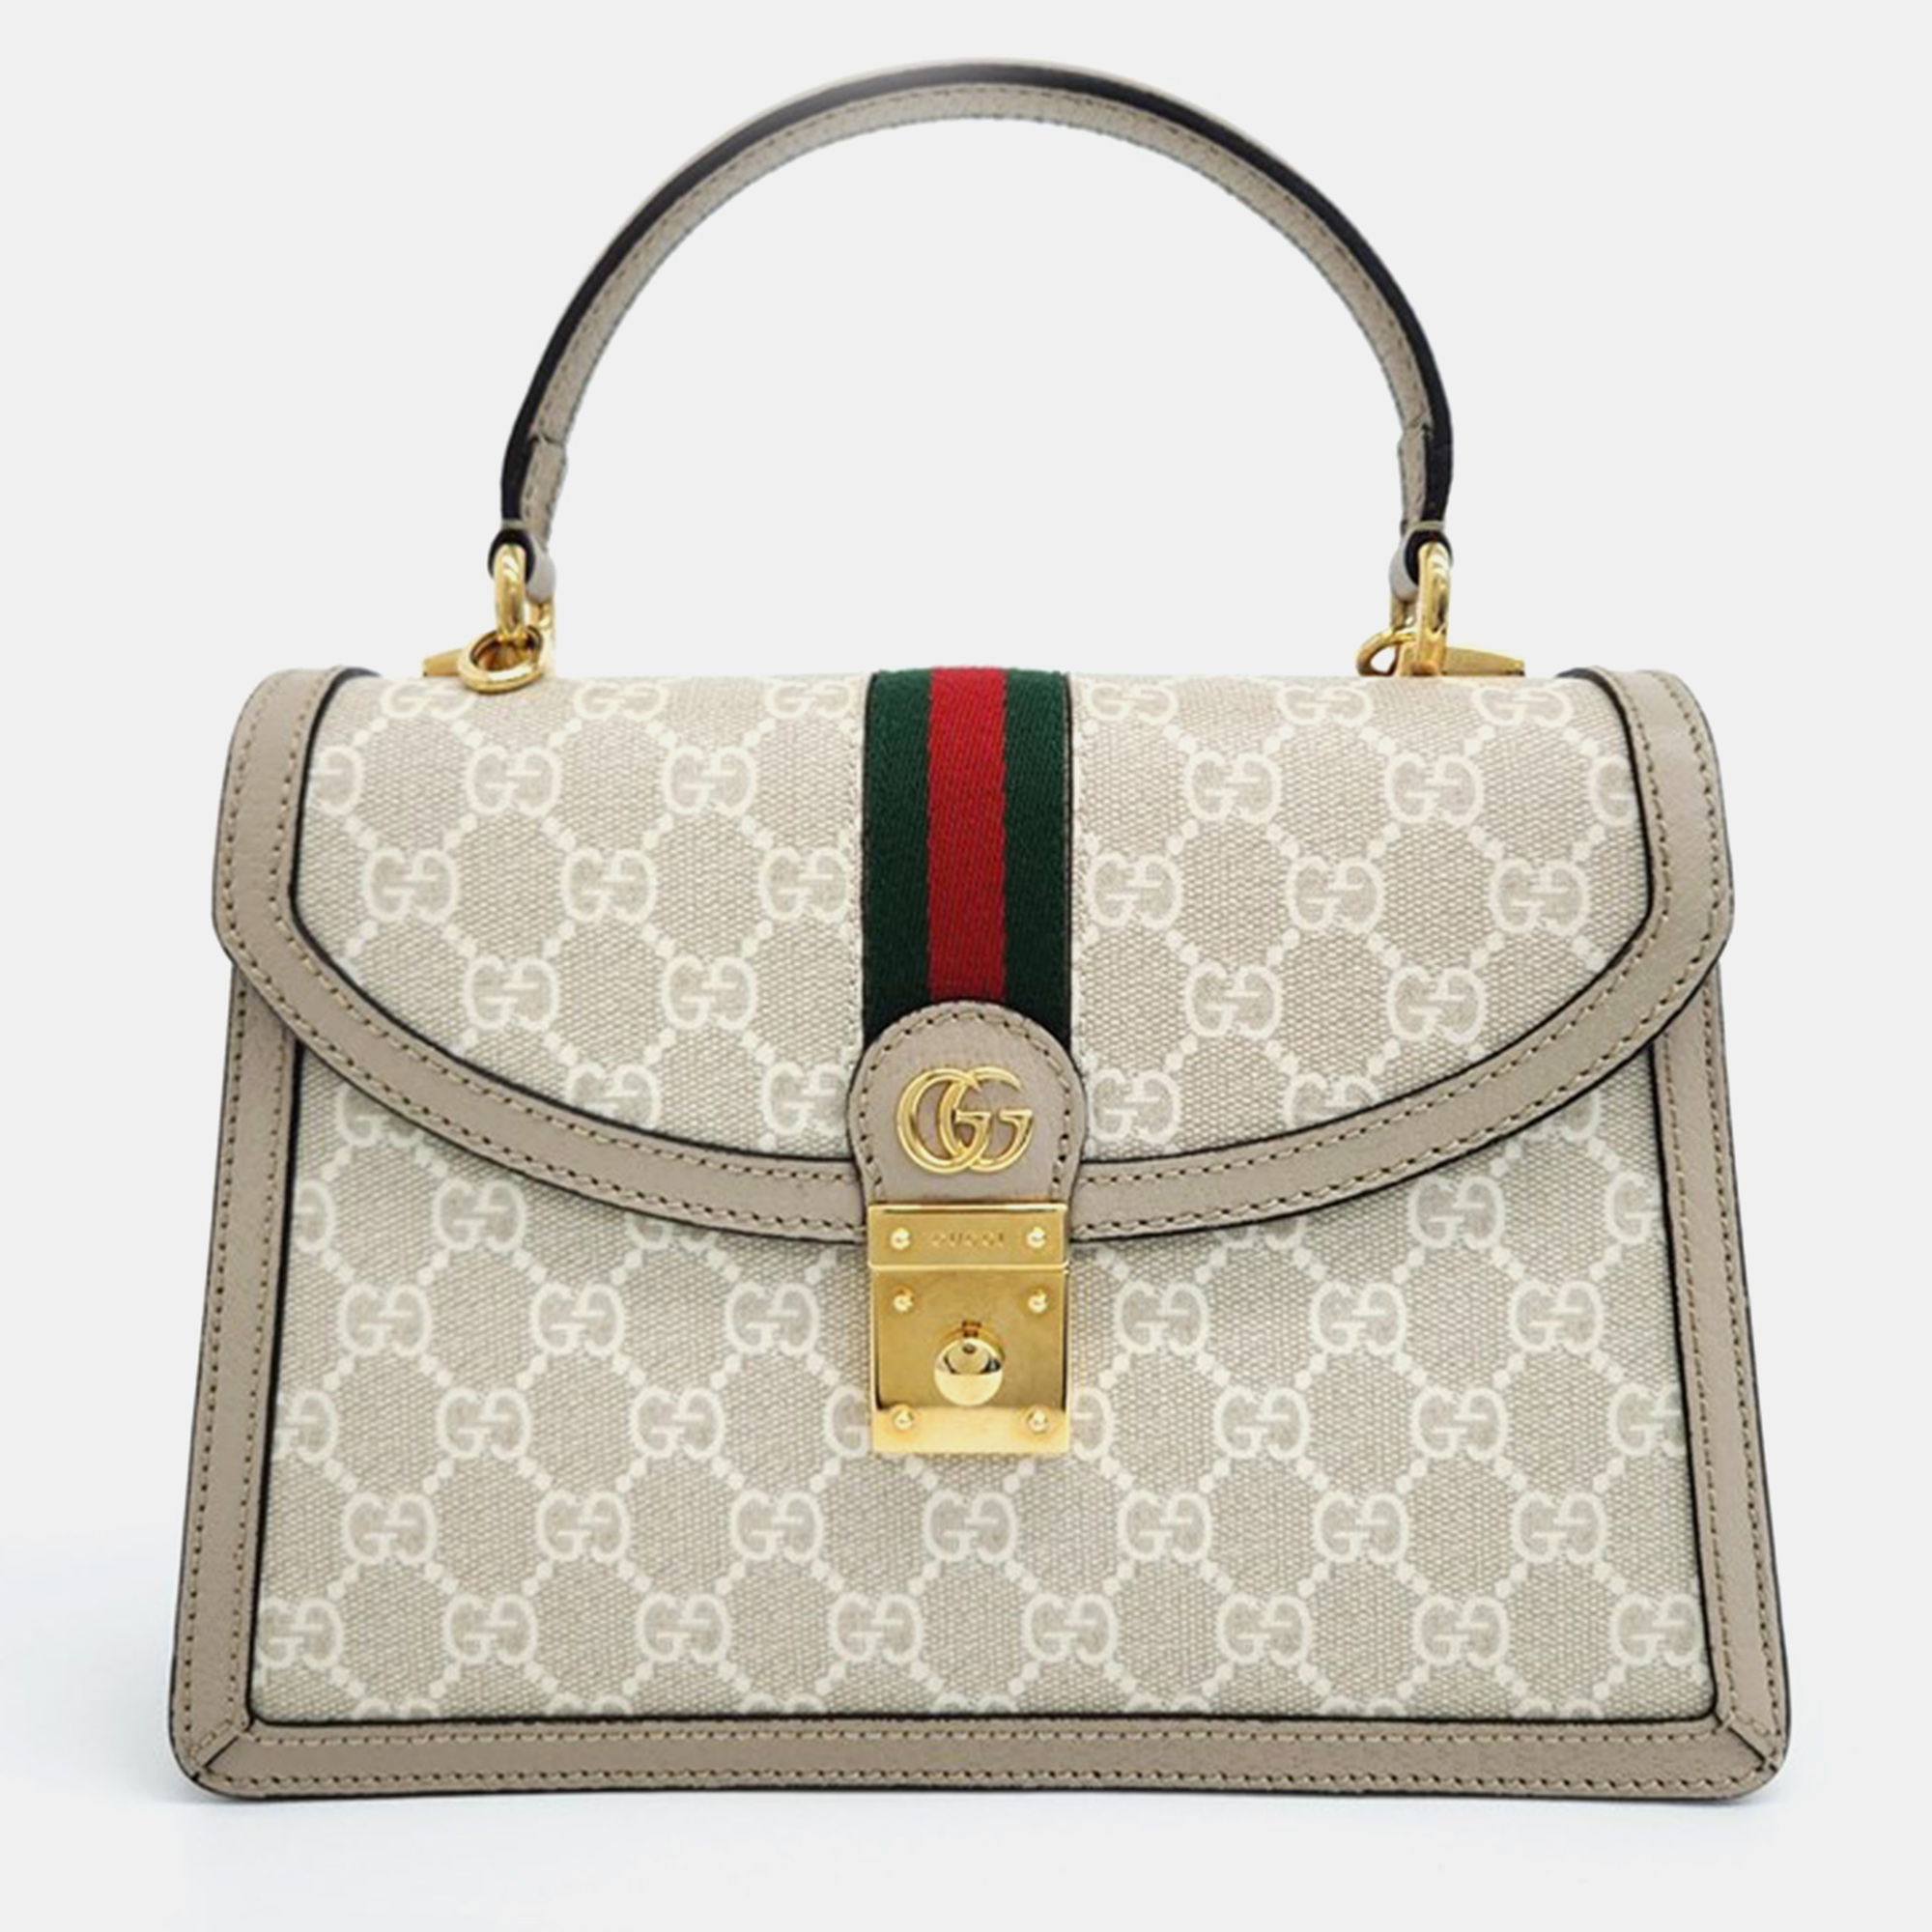 Gucci ophidia top handle bag (651055)